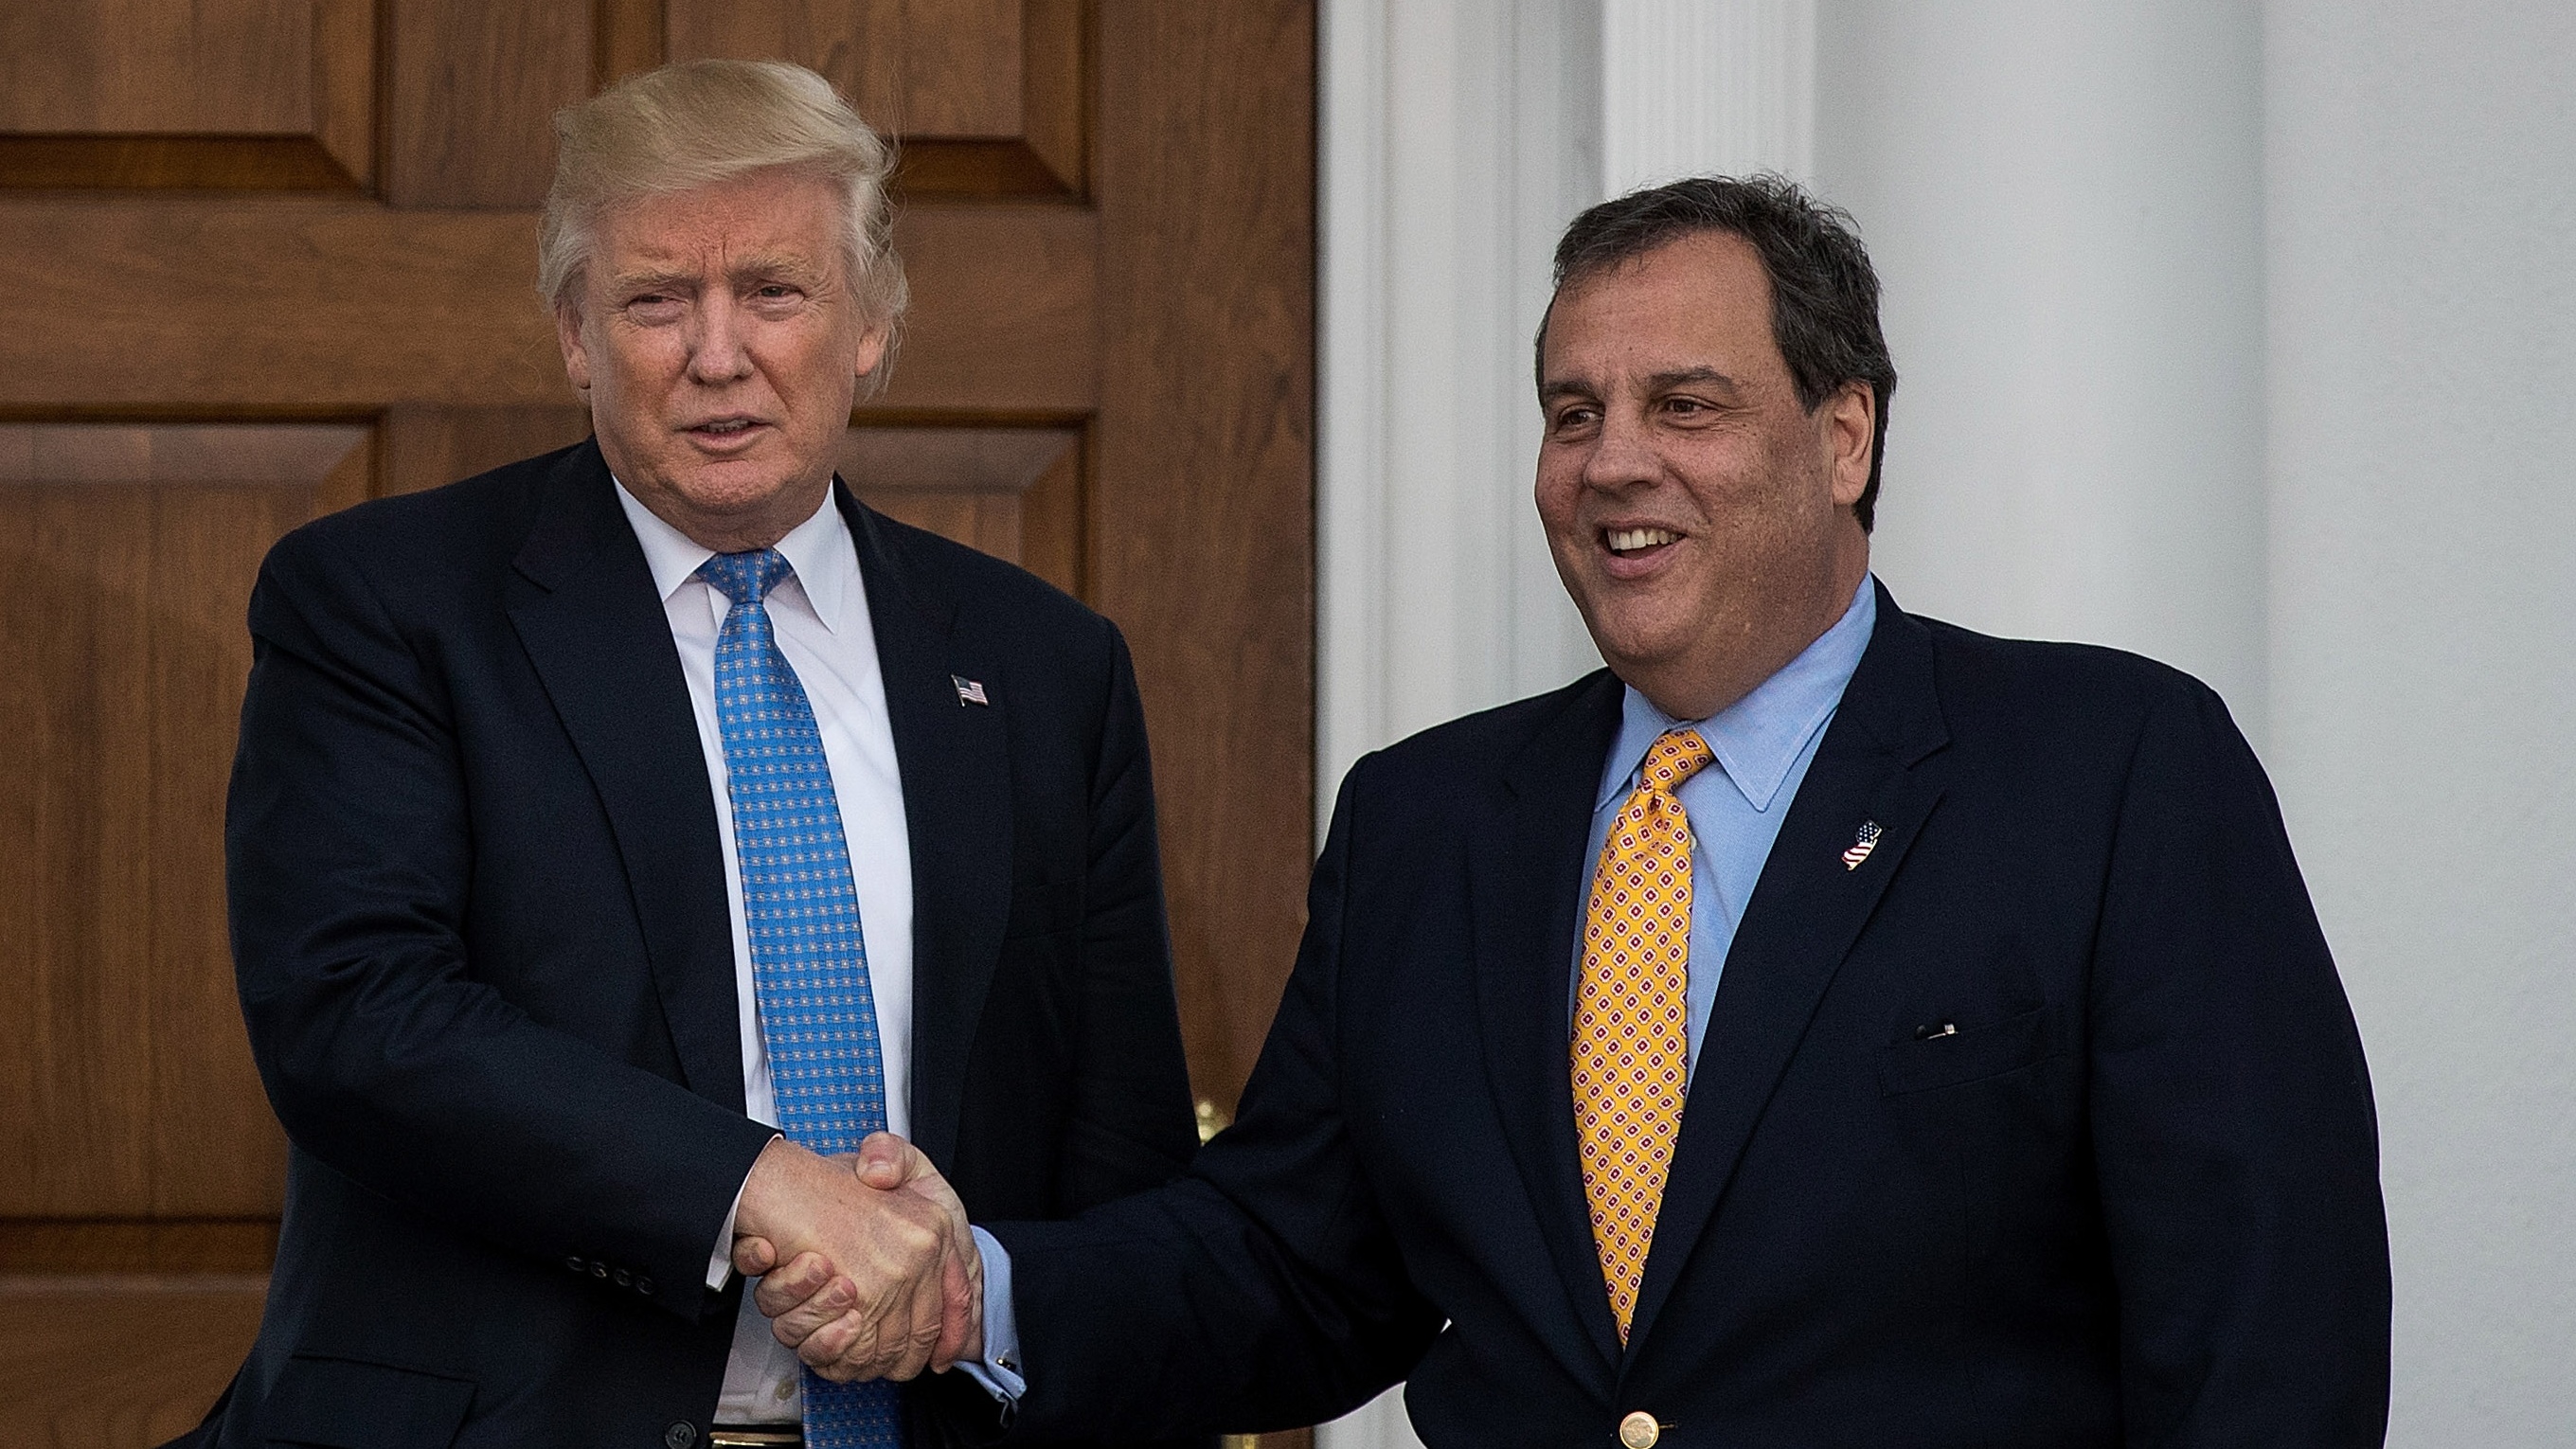 Donald Trump and Chris Christie pictured together during the 2016 election campaign